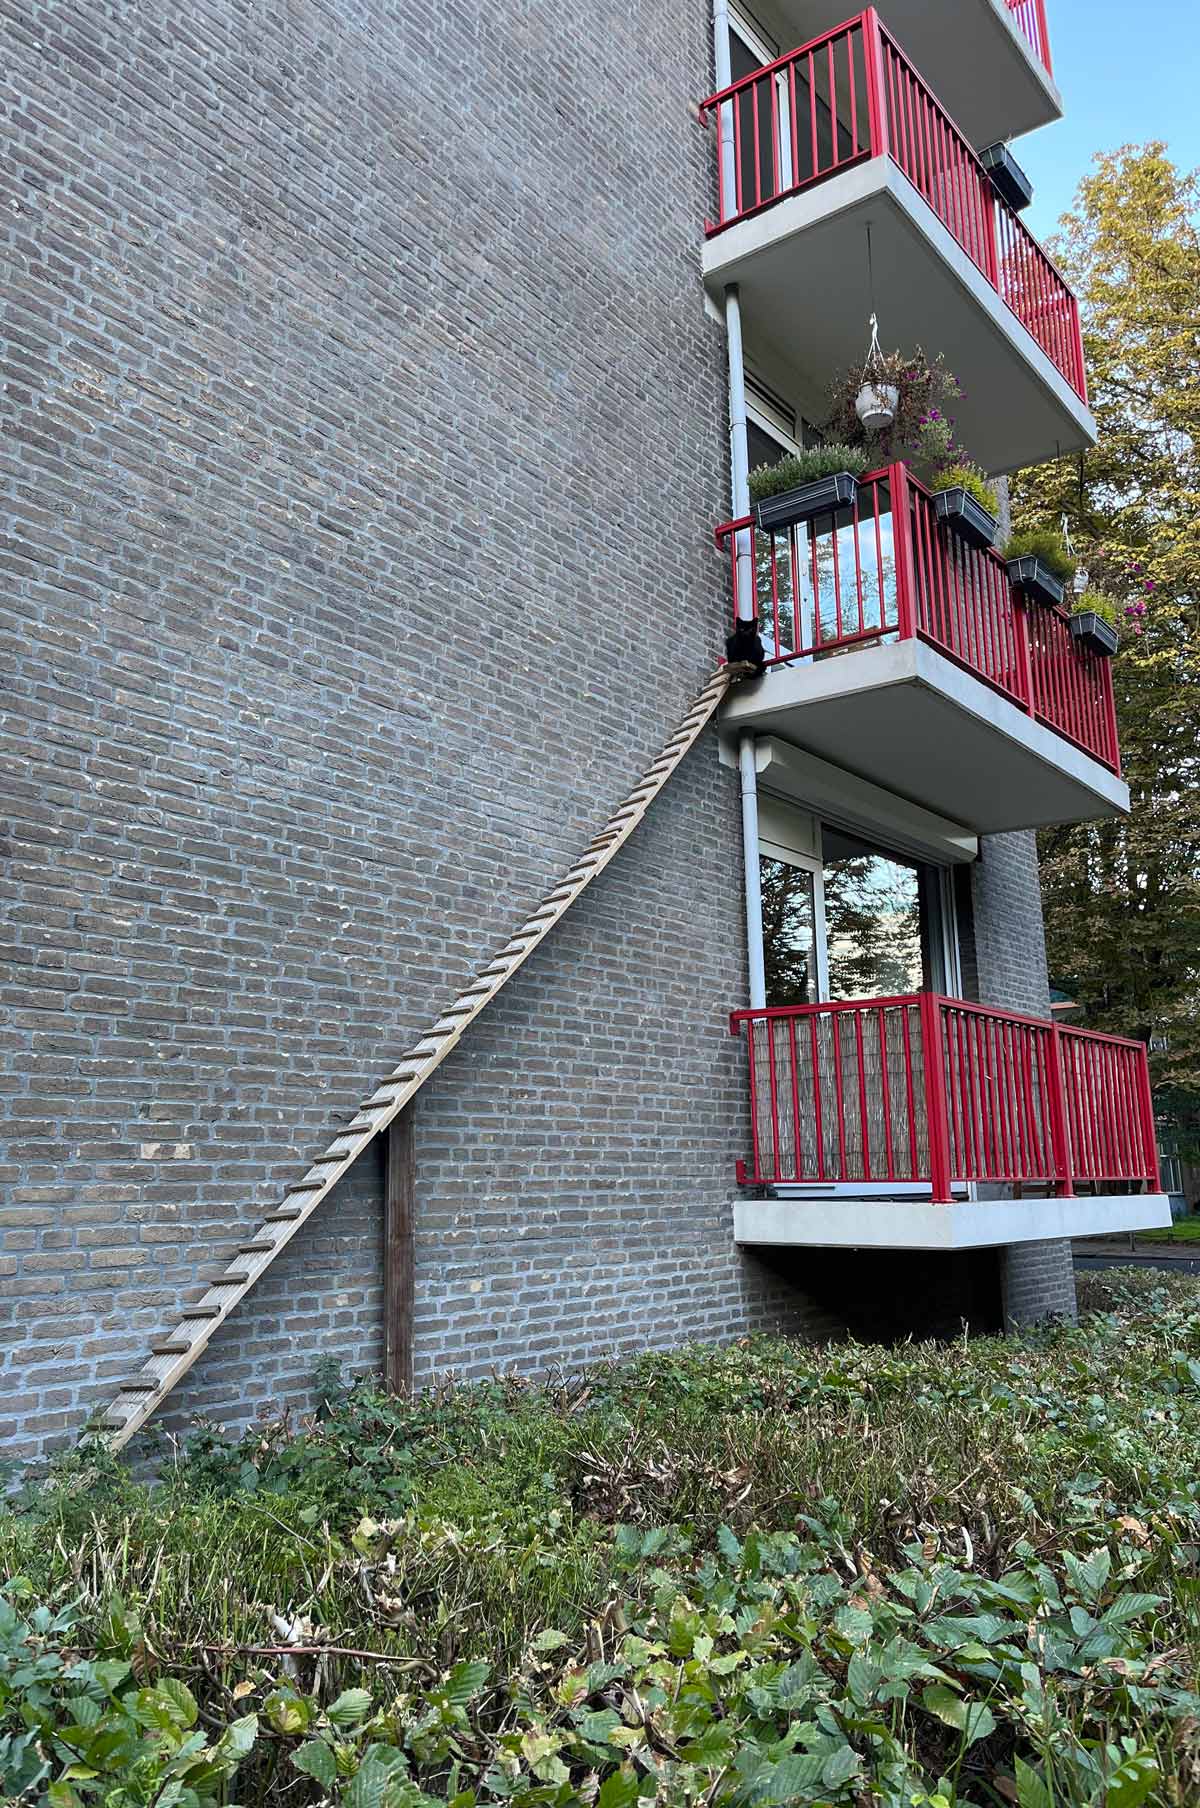 This very long kitty ladder